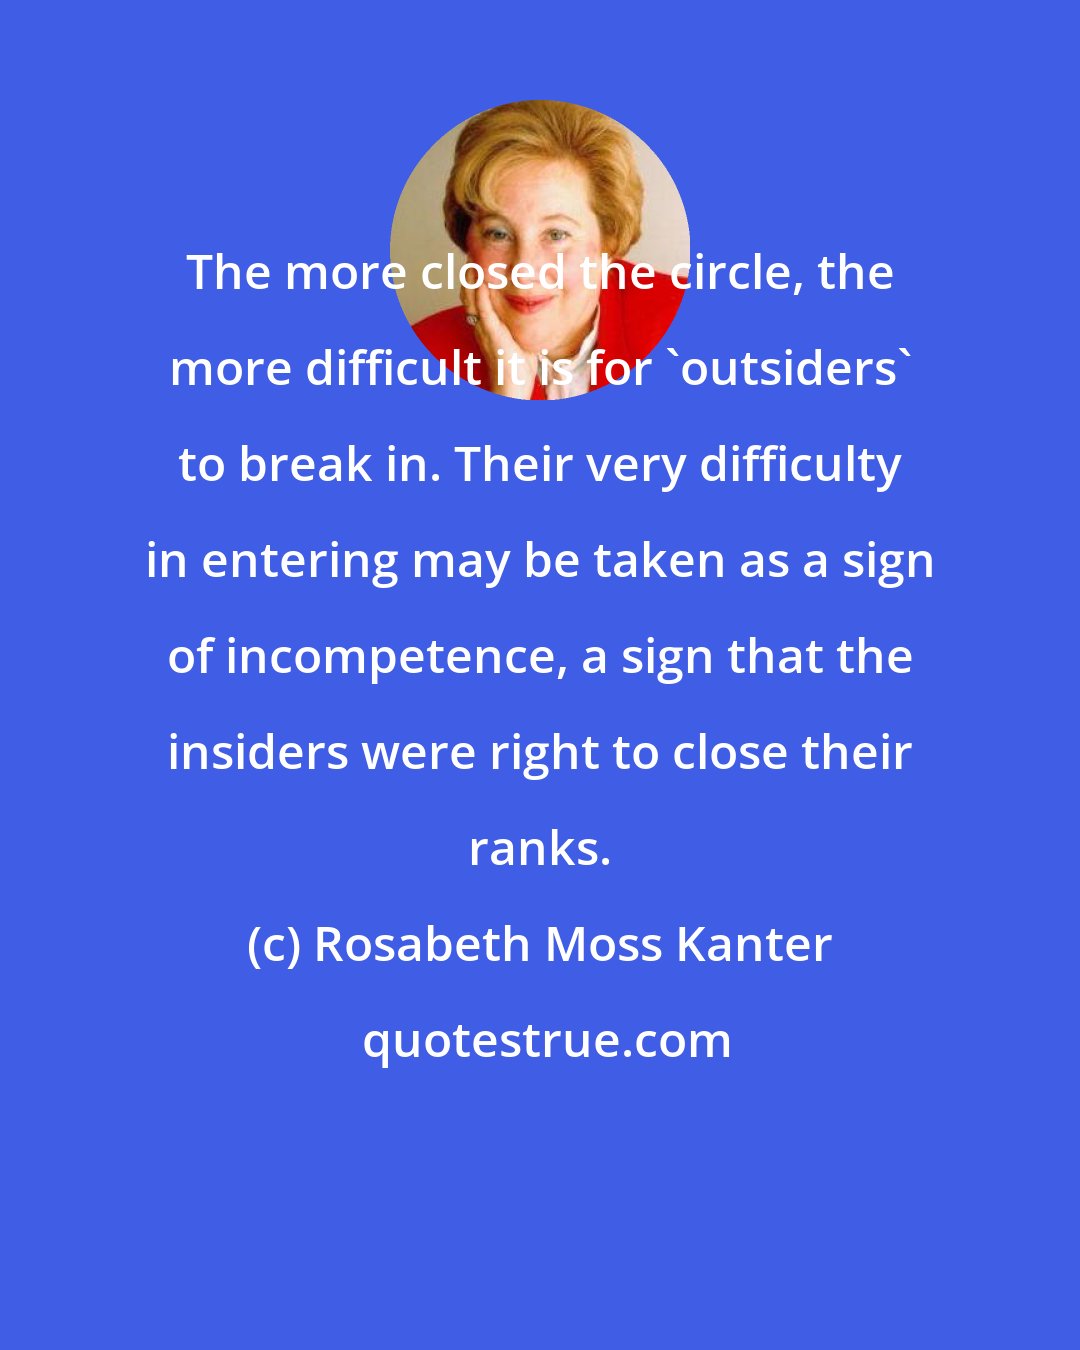 Rosabeth Moss Kanter: The more closed the circle, the more difficult it is for 'outsiders' to break in. Their very difficulty in entering may be taken as a sign of incompetence, a sign that the insiders were right to close their ranks.